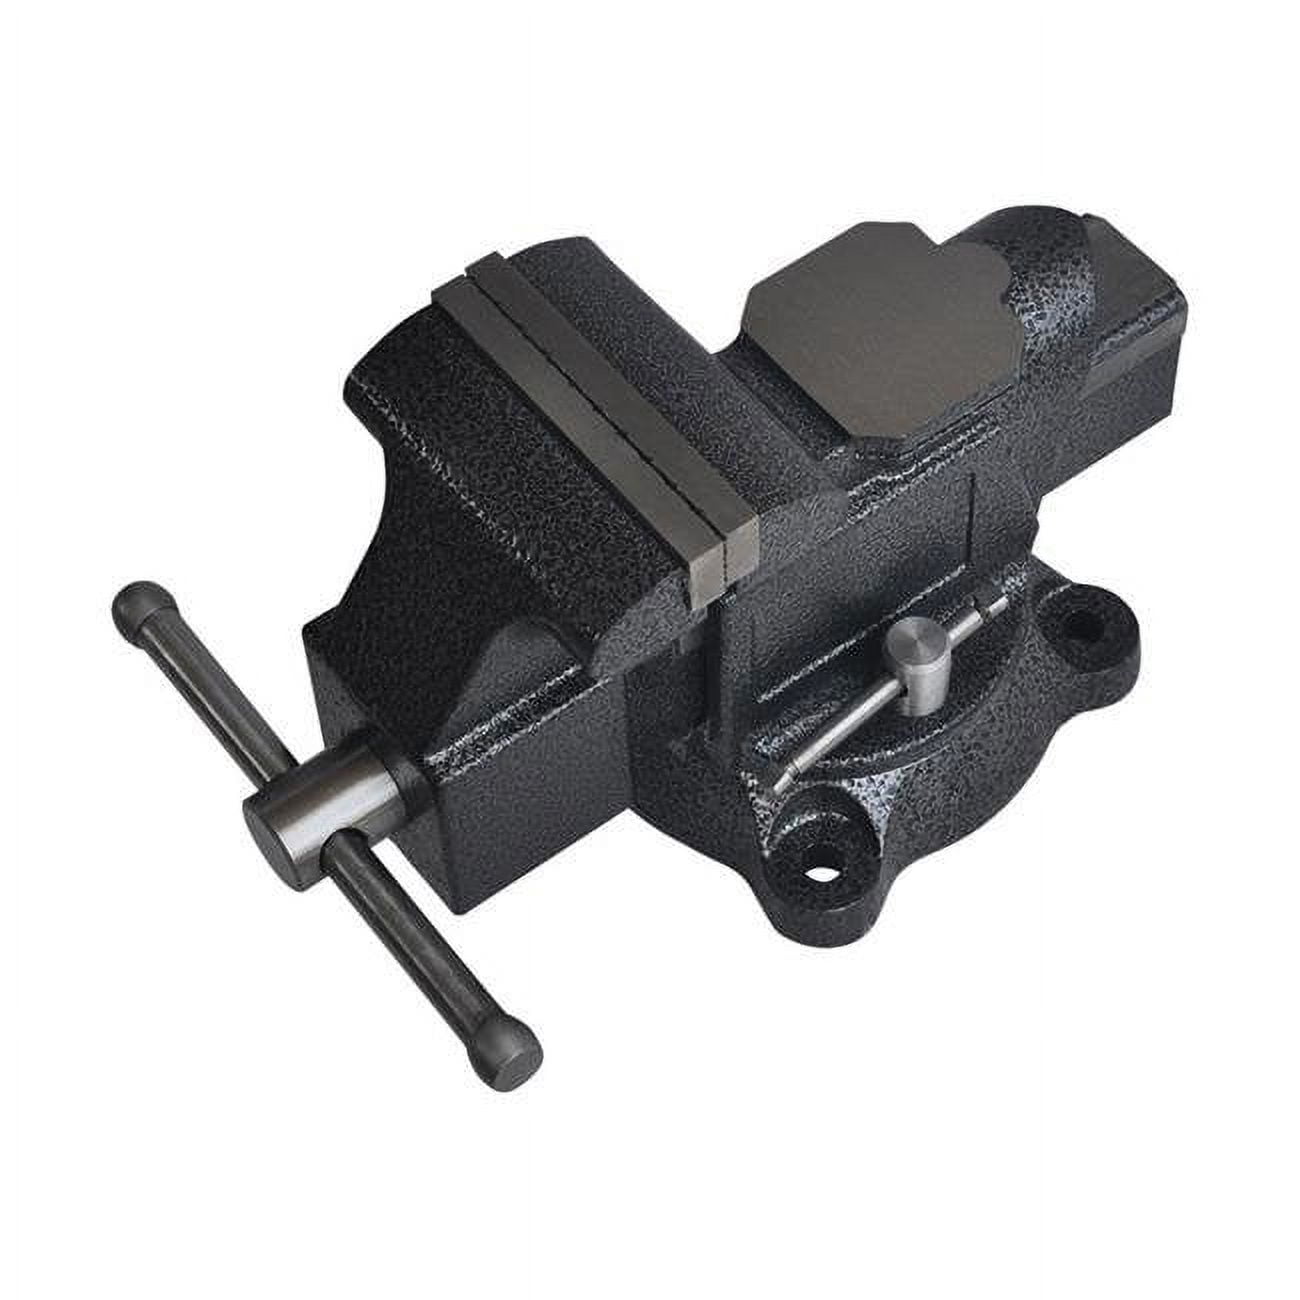 2796852 4 in. Forged Steel Bench Vise with Swivel Base, Black -  Steel Grip, DR76516